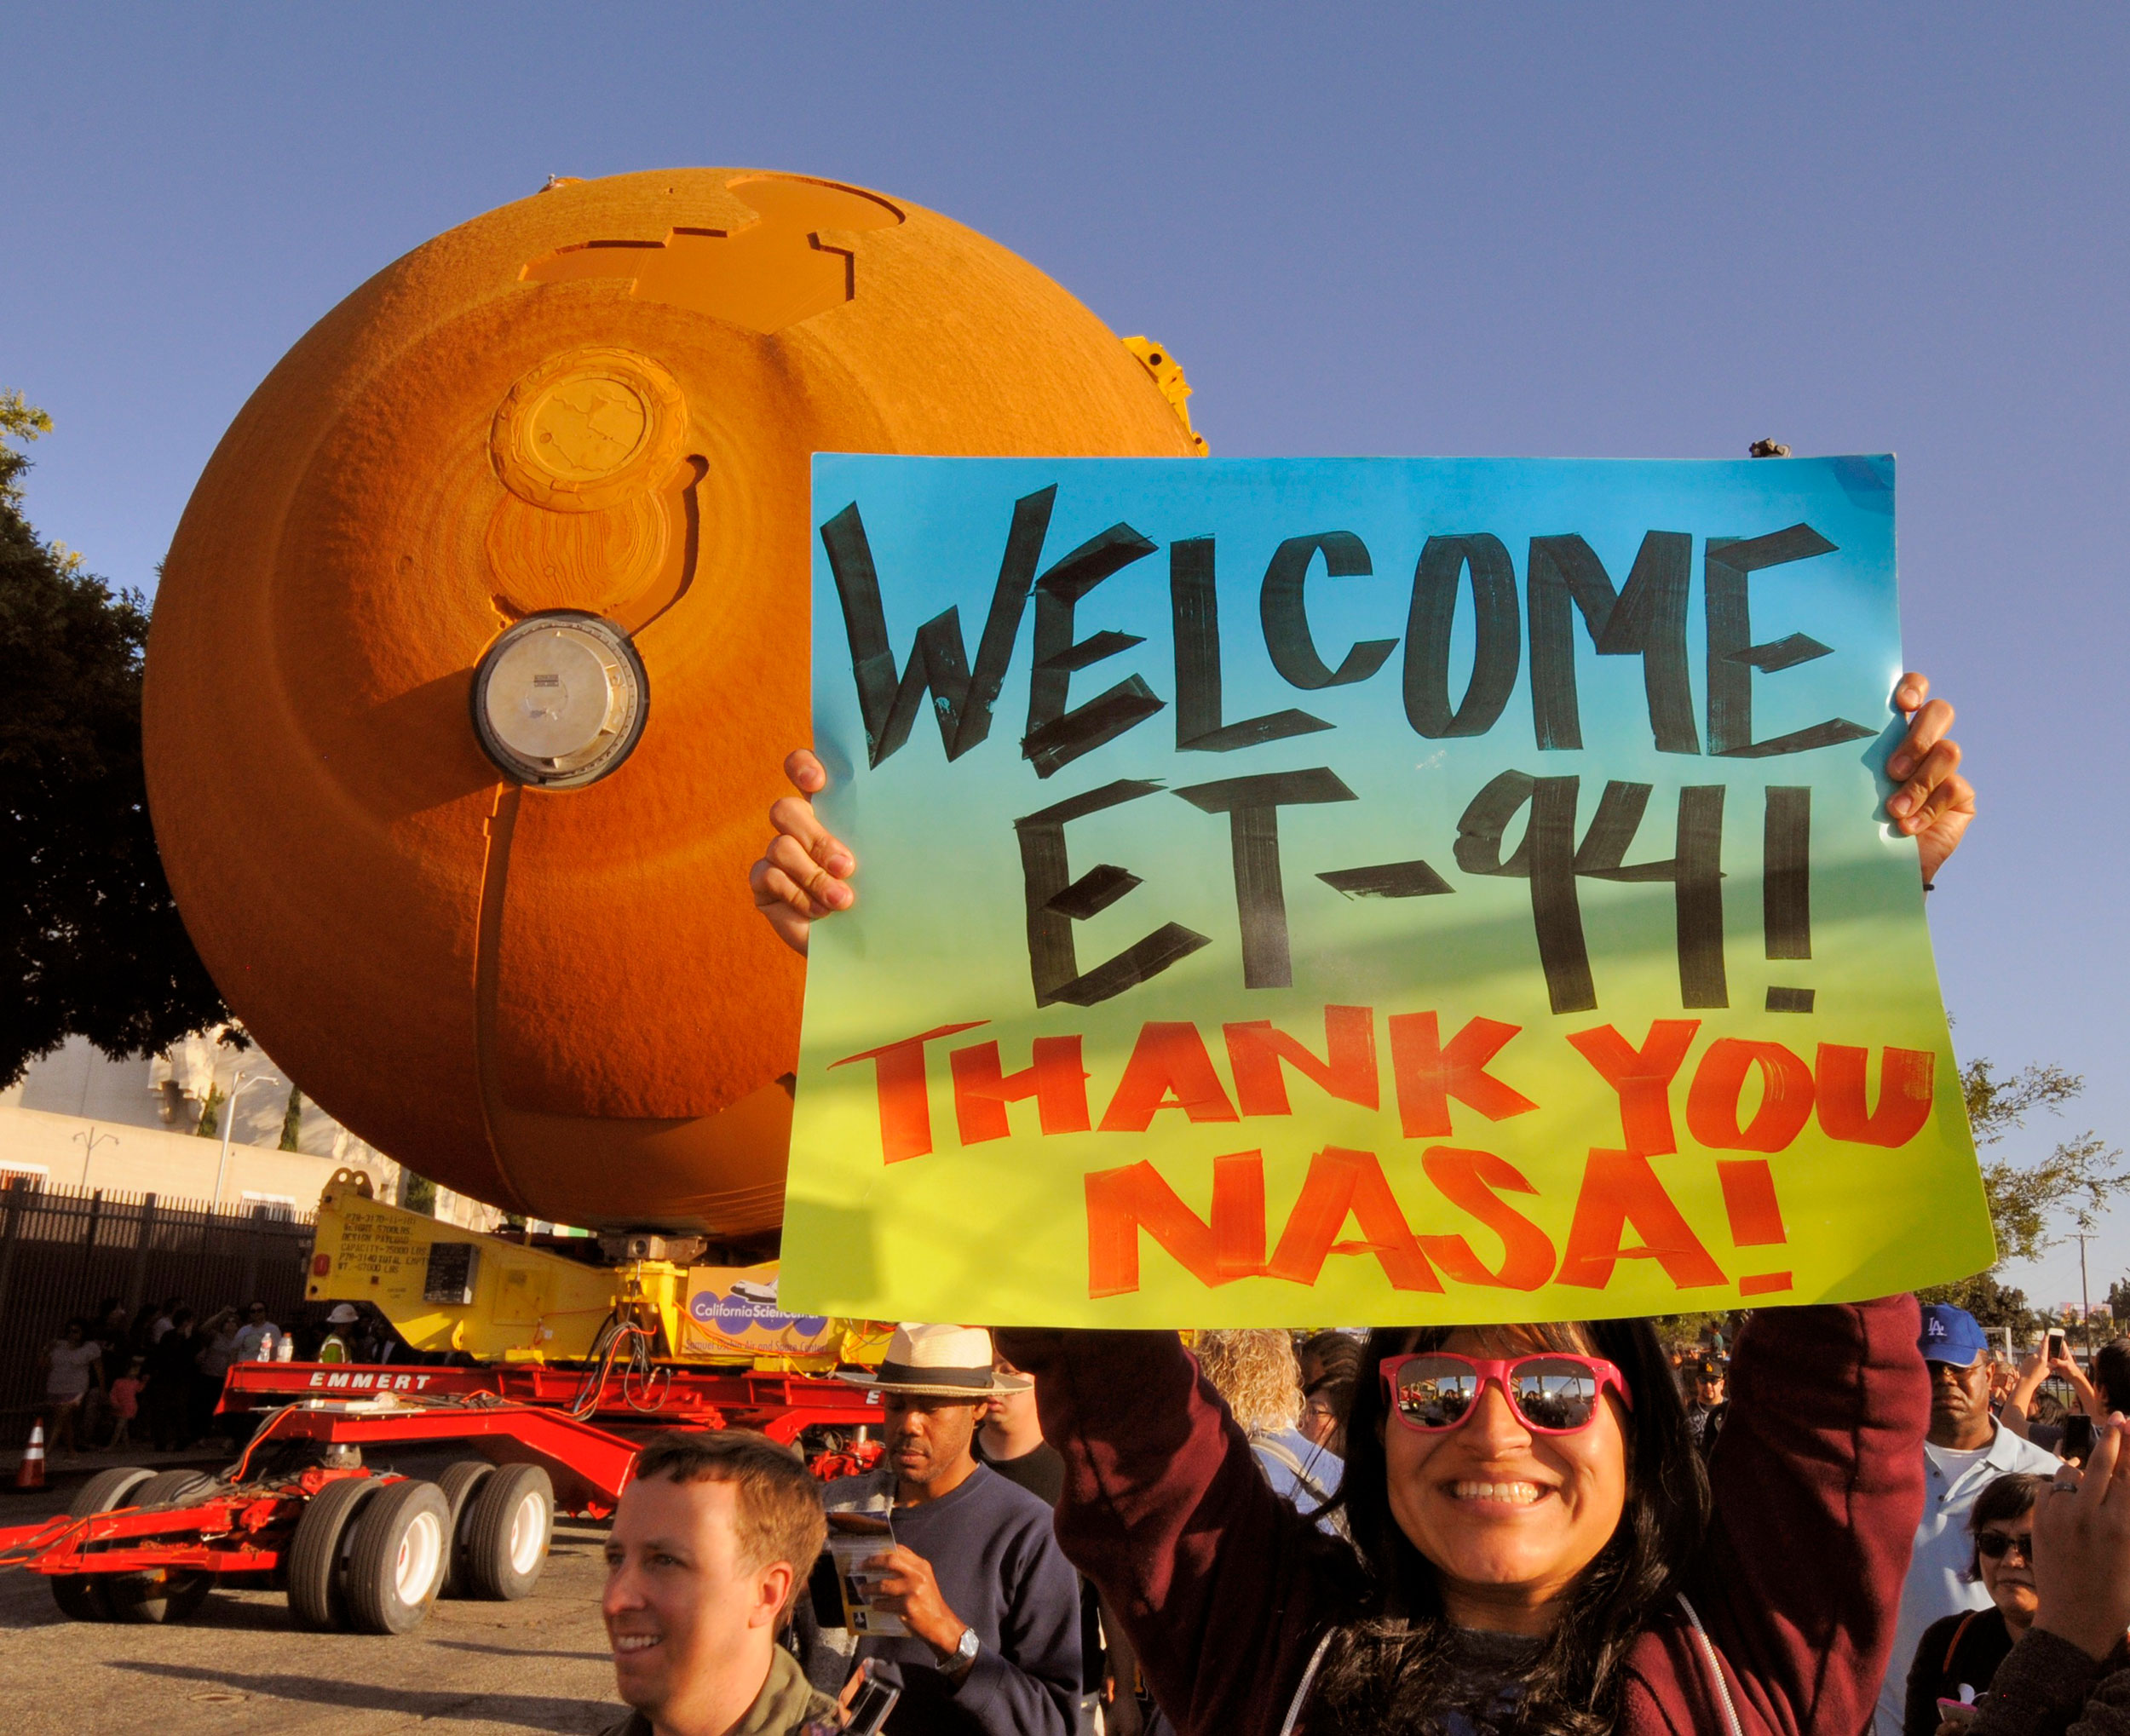 Crowds lined the 16-mile route as the last flight-ready Space Shuttle External Tank was paraded through the streets of Los Angeles earlier this year. Credit: Julian Leek/JNN